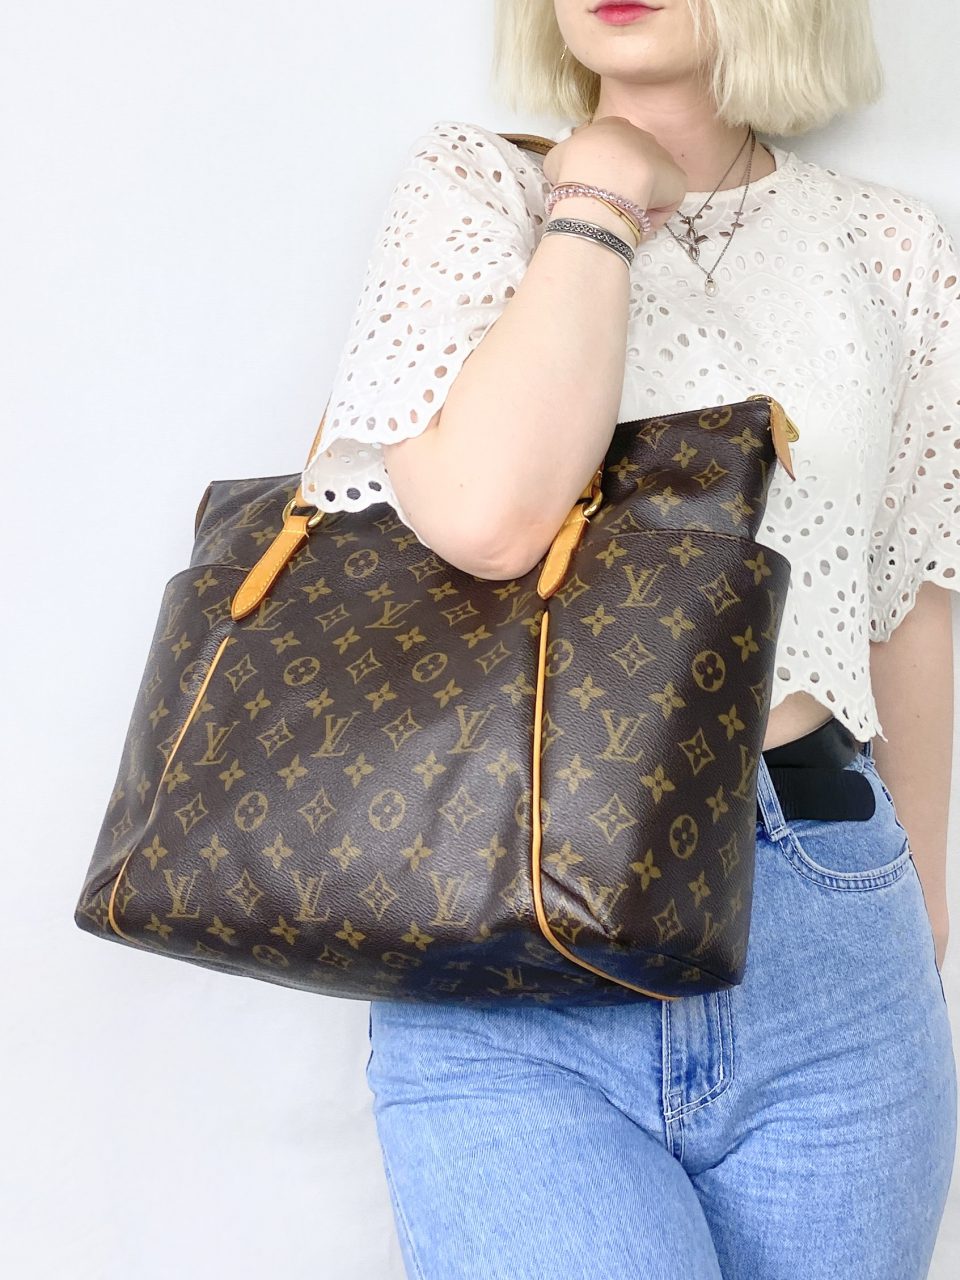 ❌ Traded. 2017 Louis Vuitton Totally MM